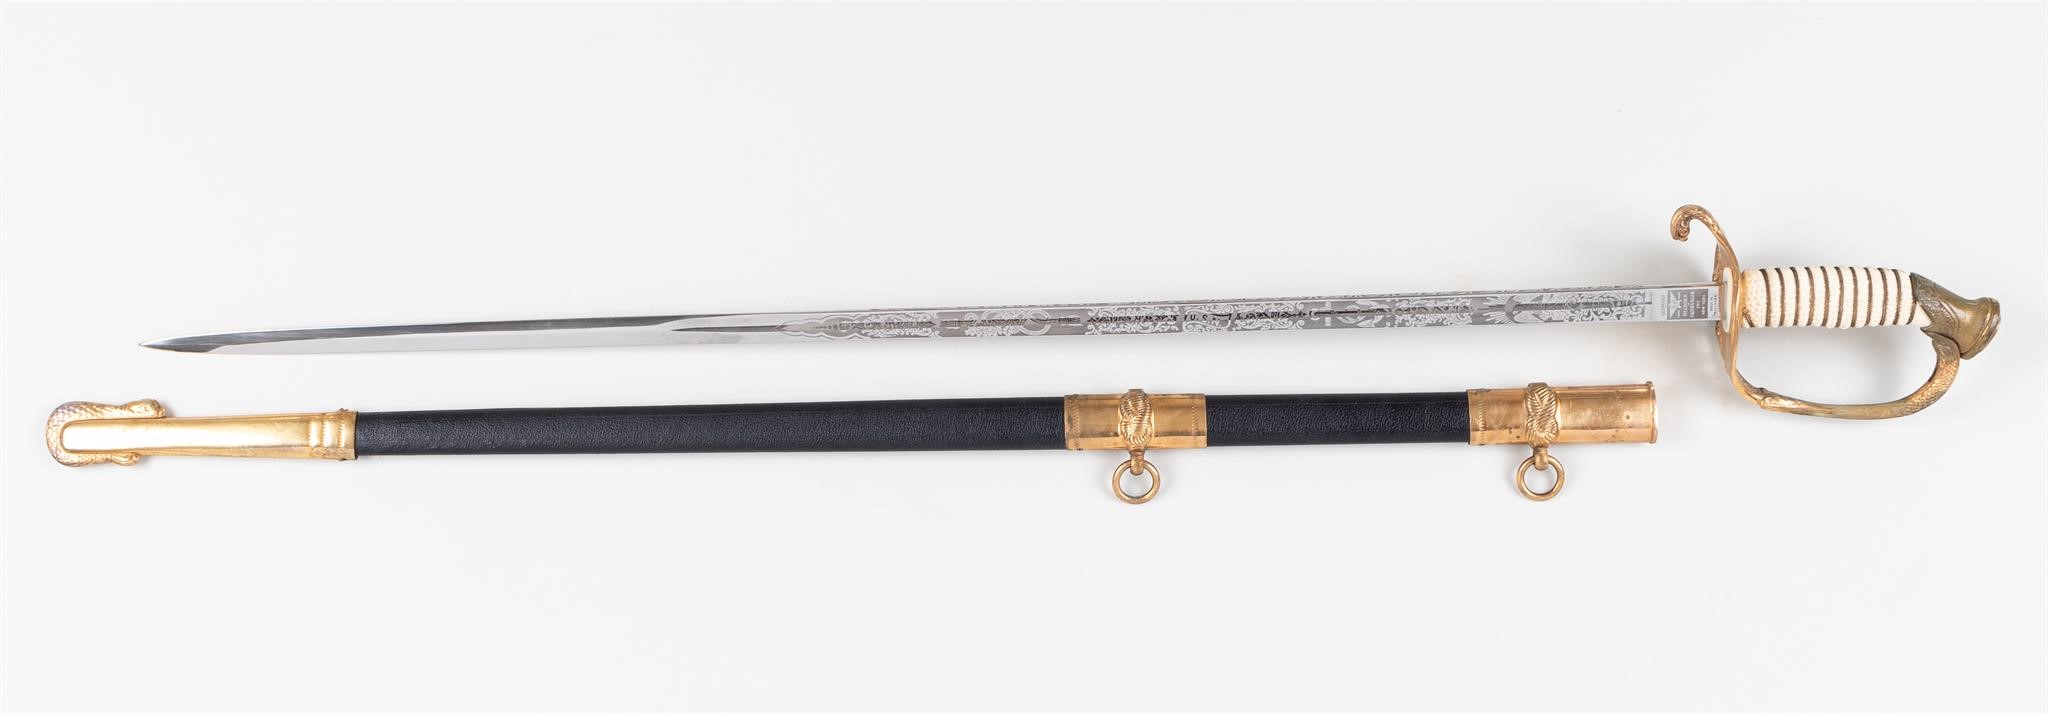 US NAVY OFFICERS SWORD AND SCABBARD